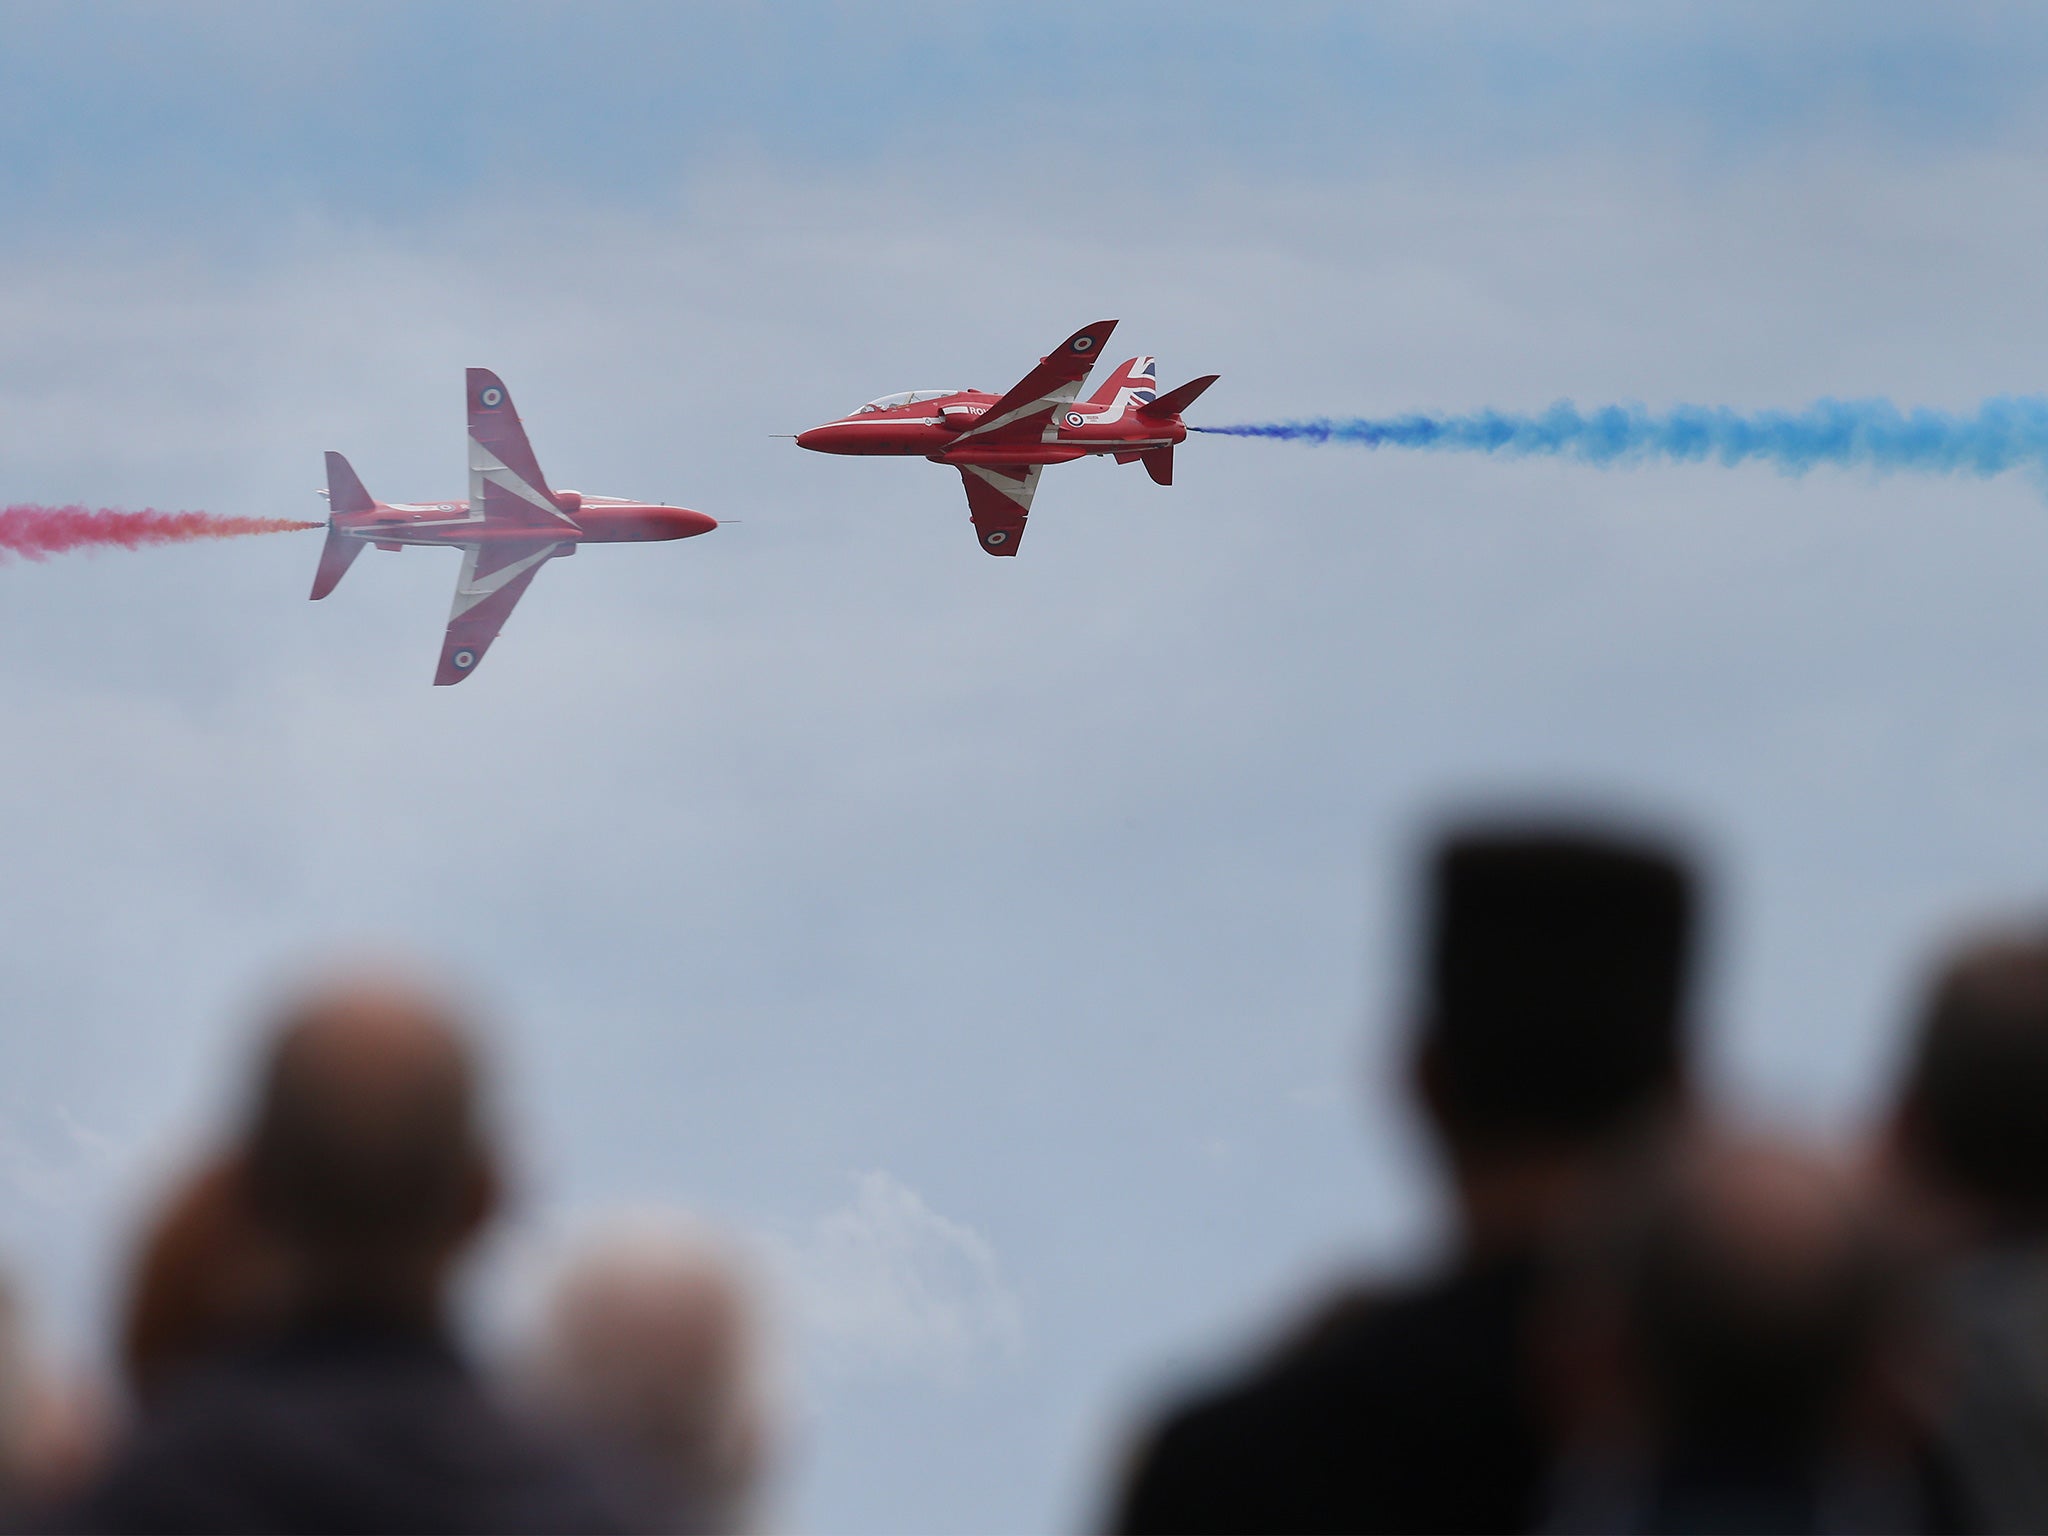 People watch as the RAF Red Arrows display team takes part in the Clacton Airshow